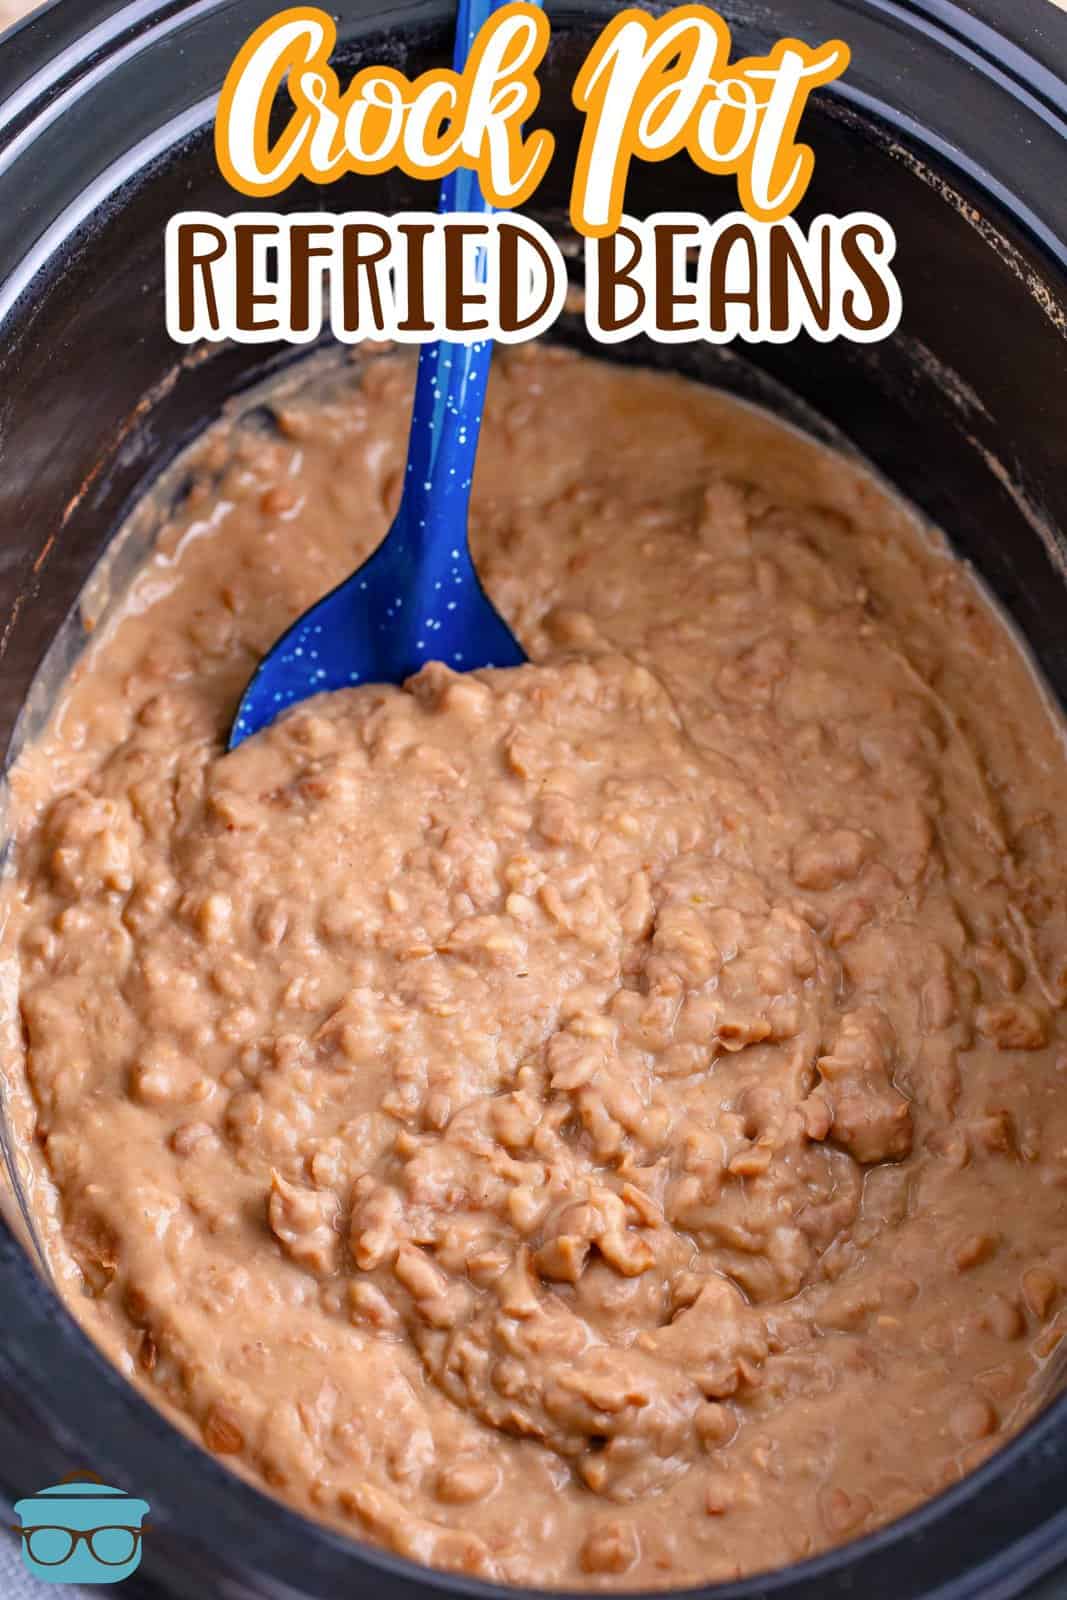 A blue serving spoon in a slow cooker of refried beans.